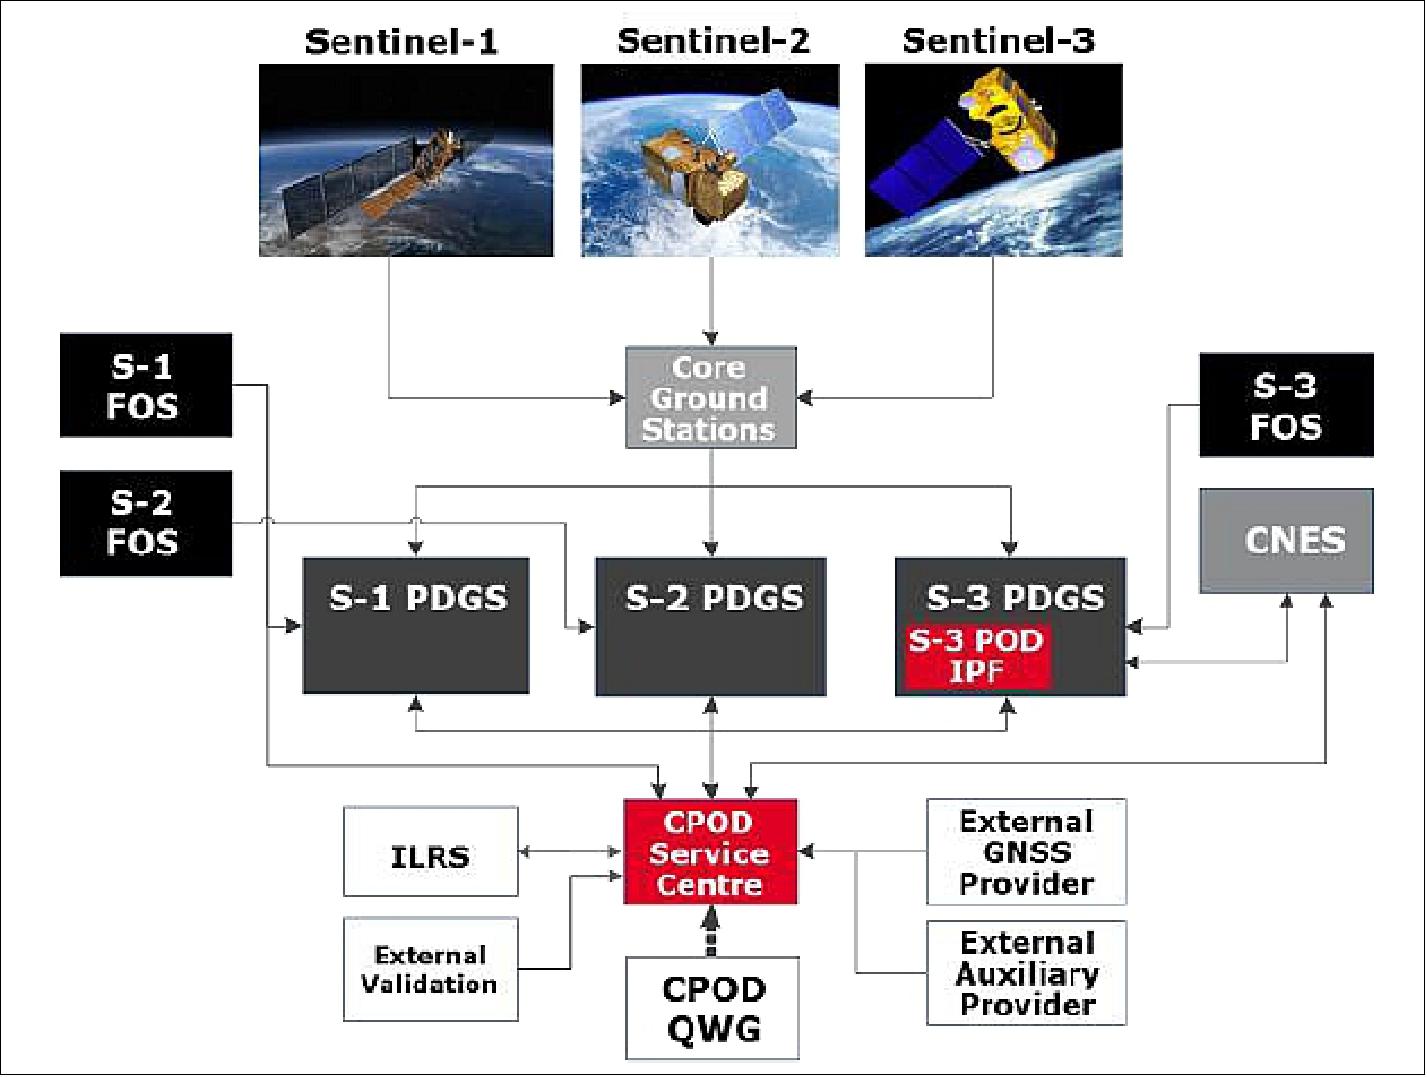 Overview of the CPOD service elements